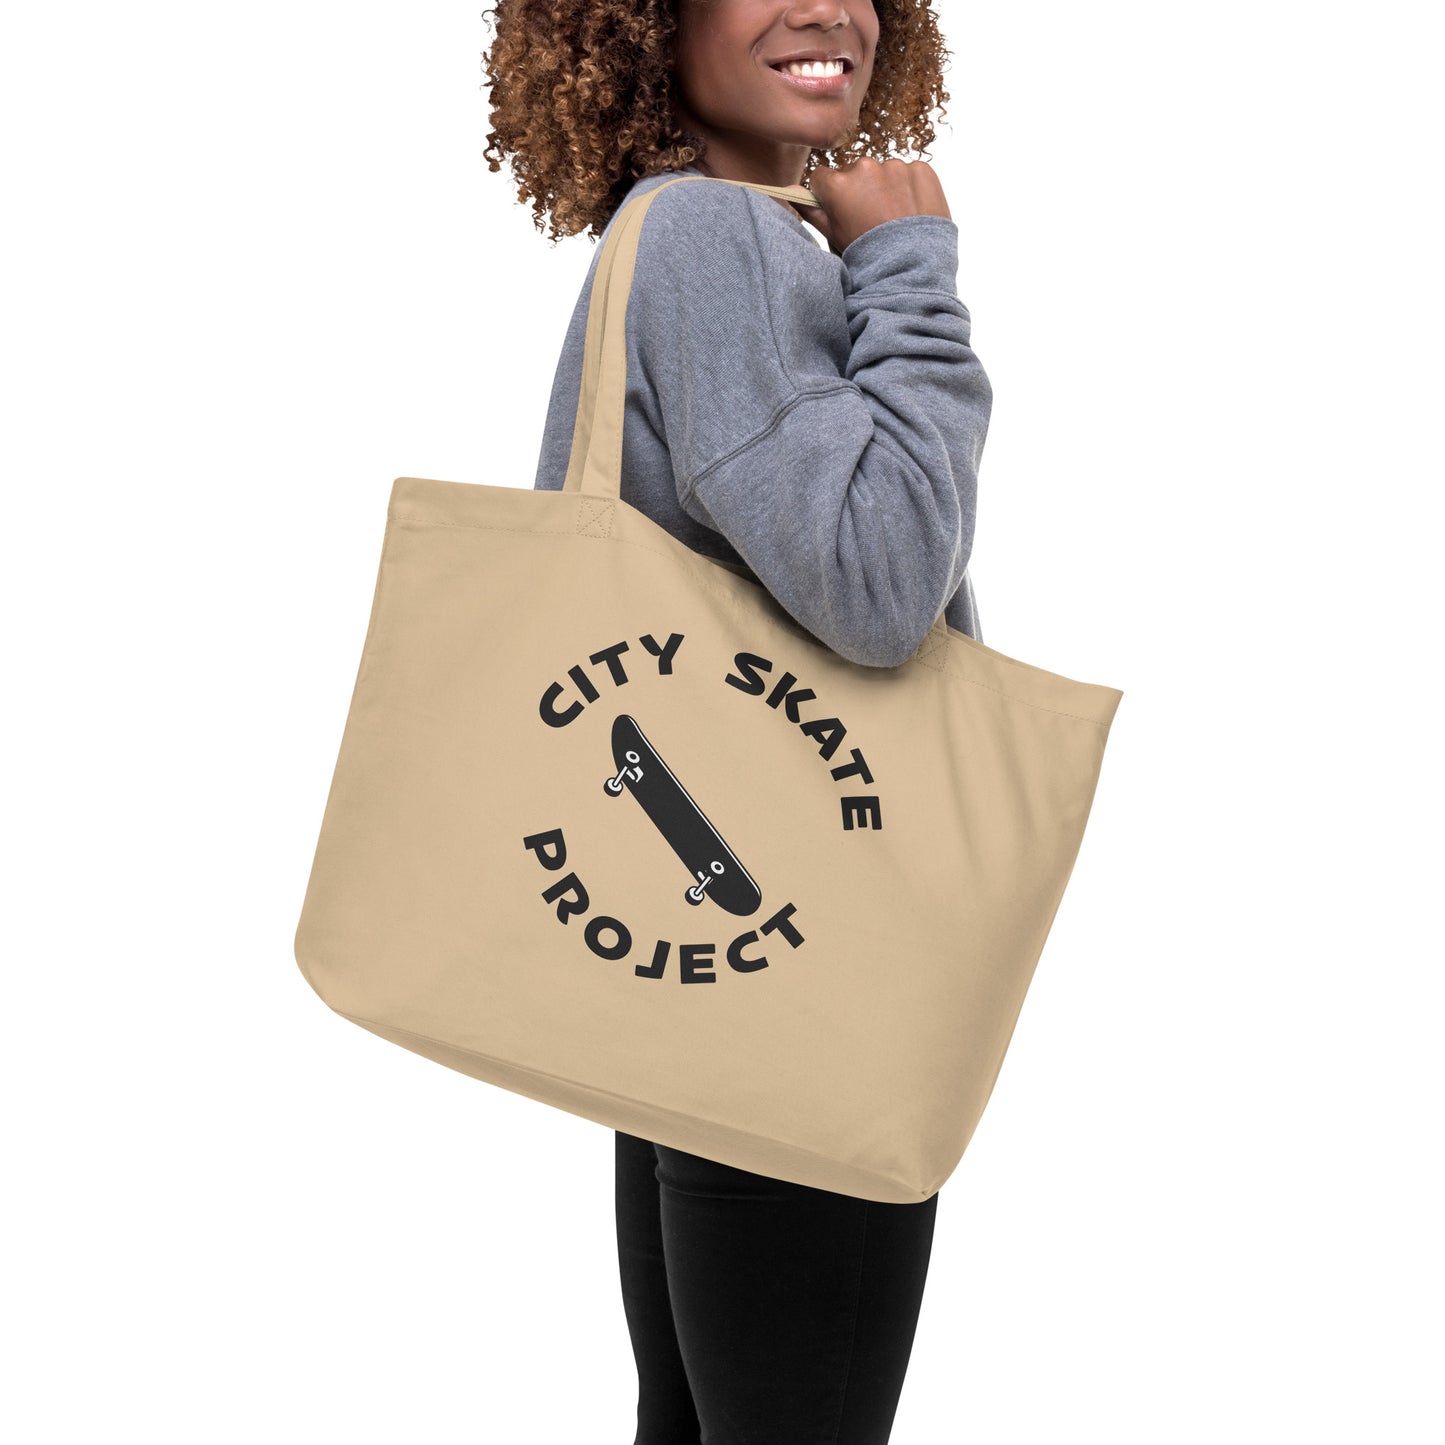 City Skate Project Large organic tote bag